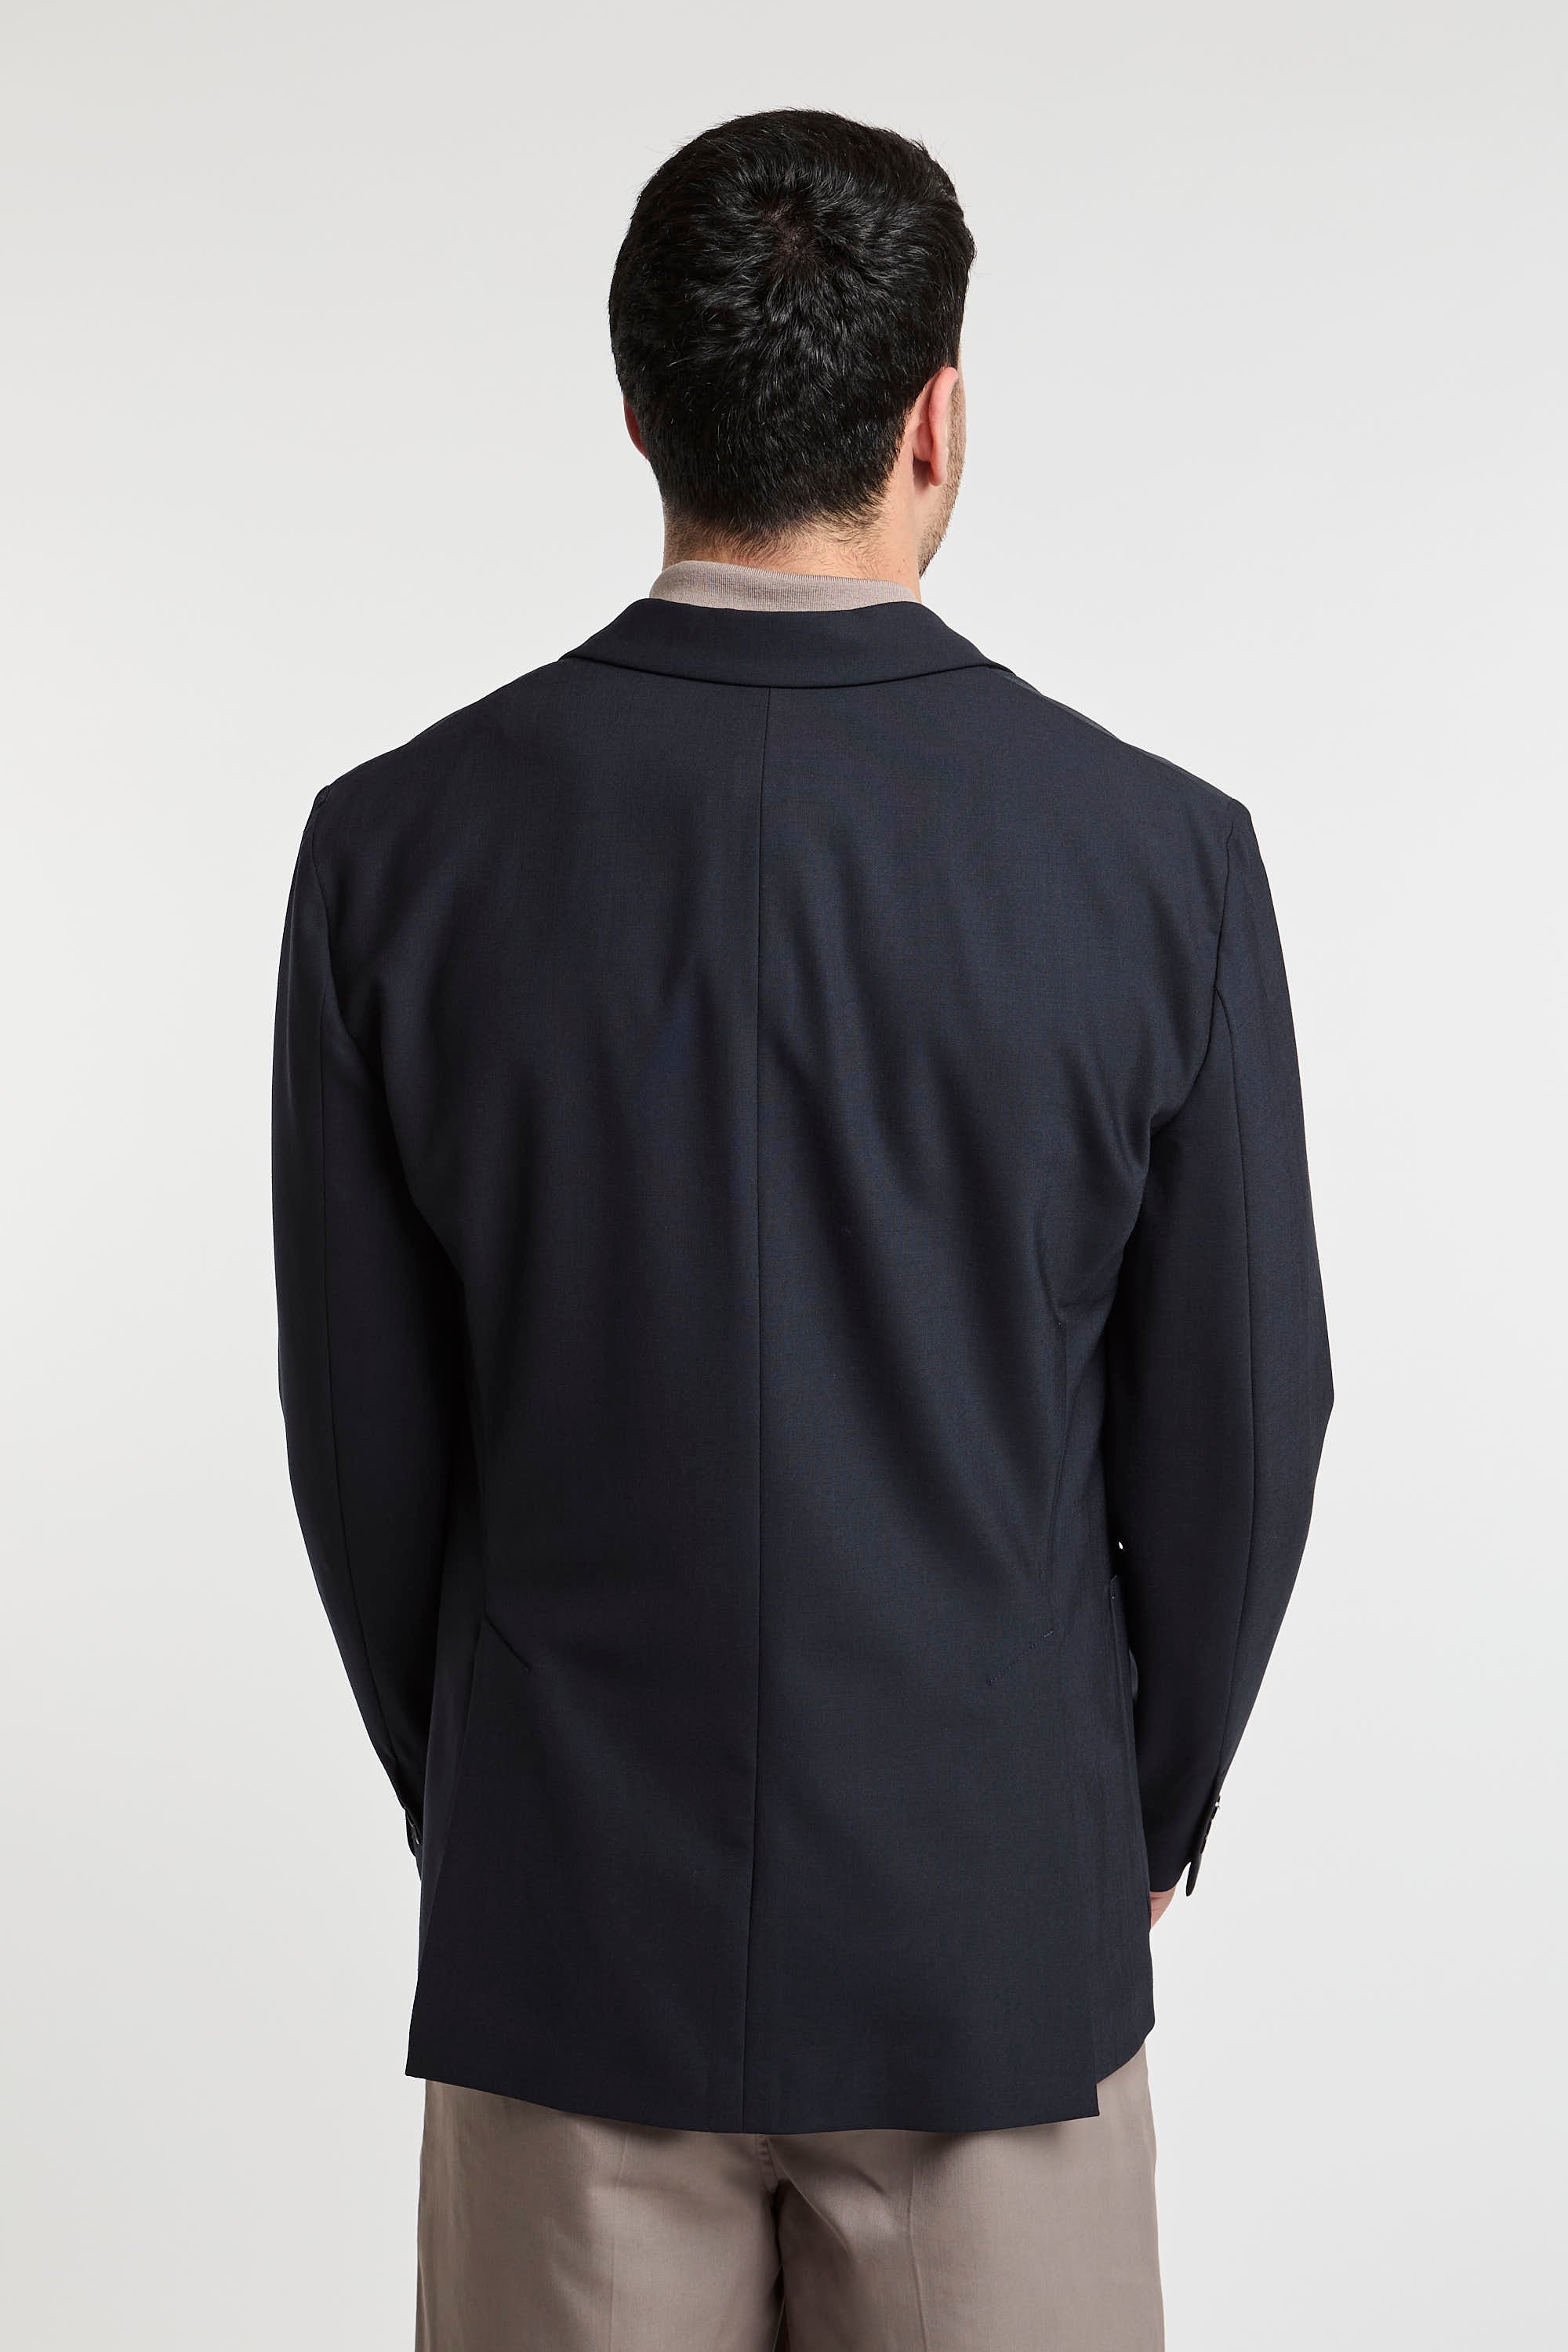 Paolo Pecora Double-Breasted Blue Jacket in Polyester/Wool/Elastane-6